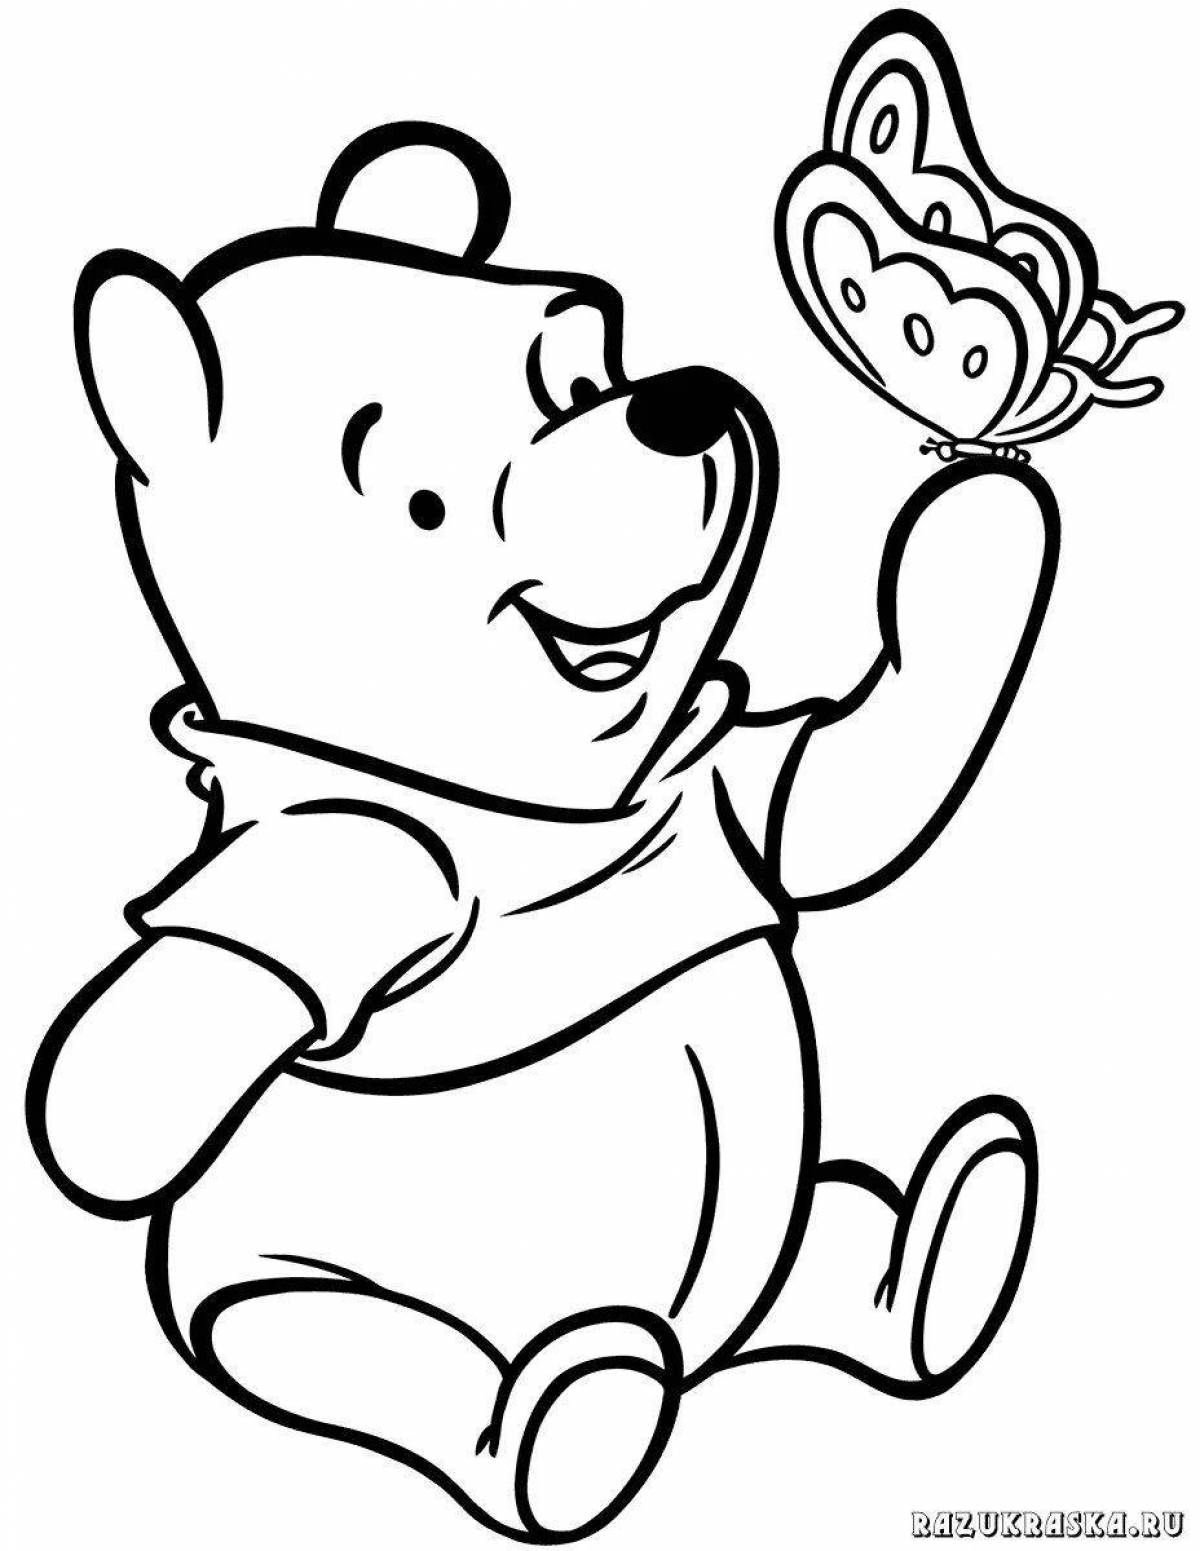 Awesome super bear coloring book